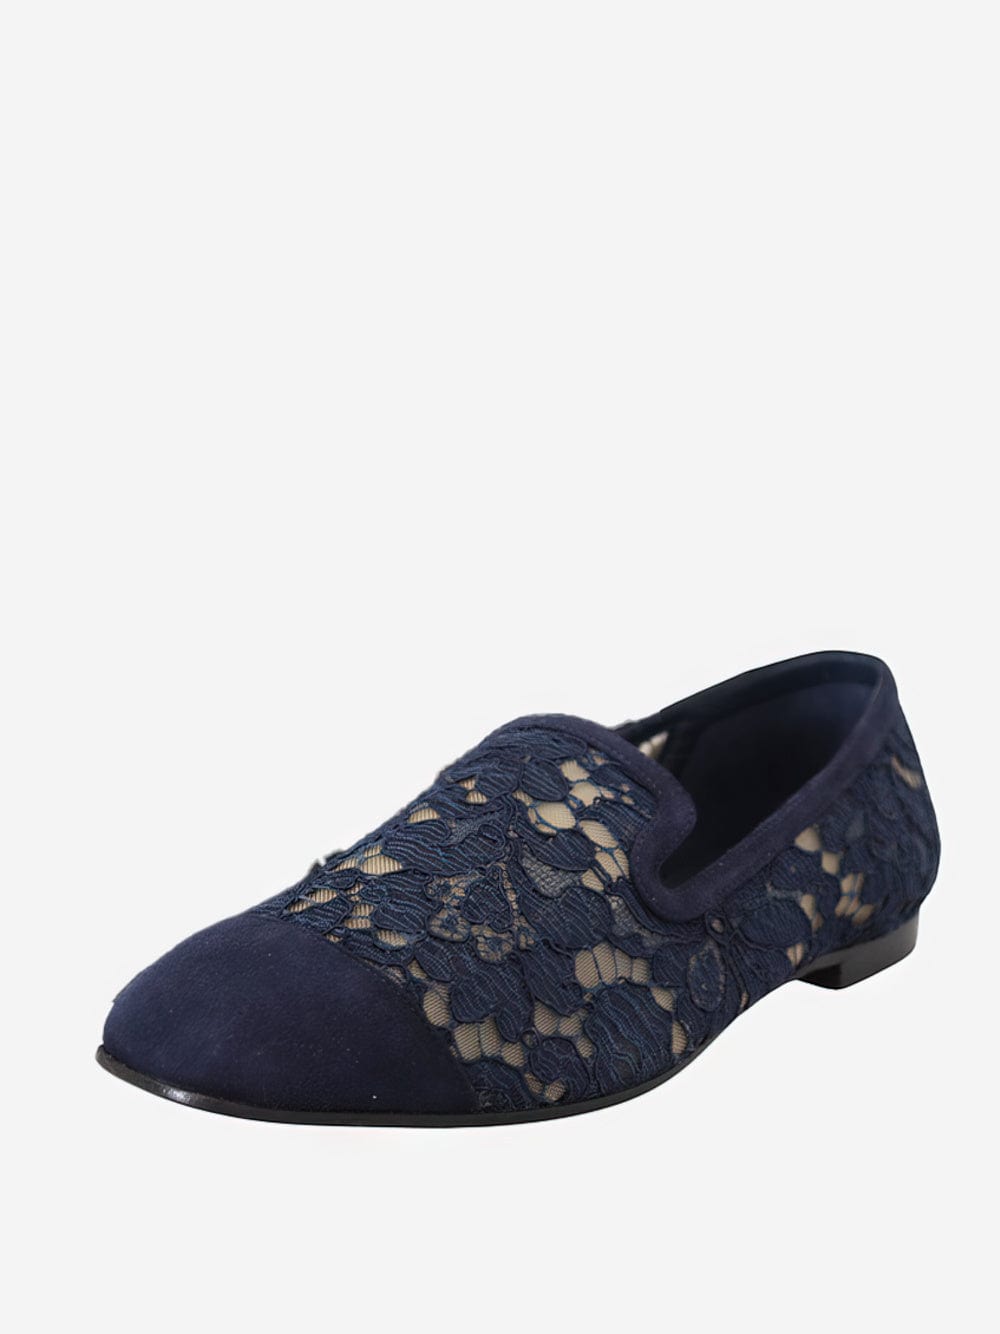 Dolce & Gabbana Floral Lace Loafers